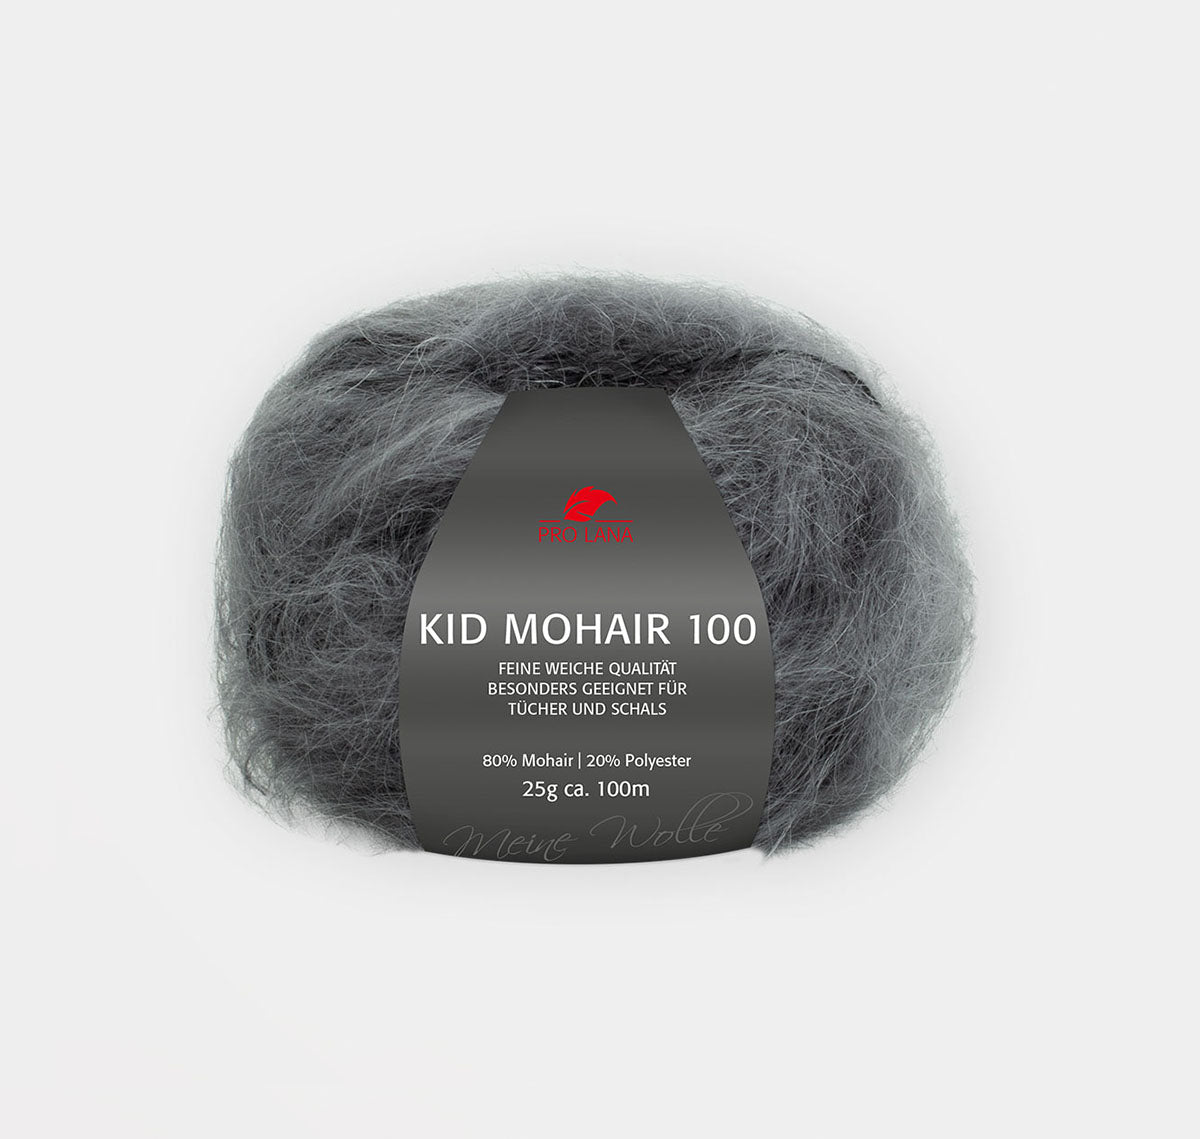 Pro Lana Kid Mohair 100 in Anthracite